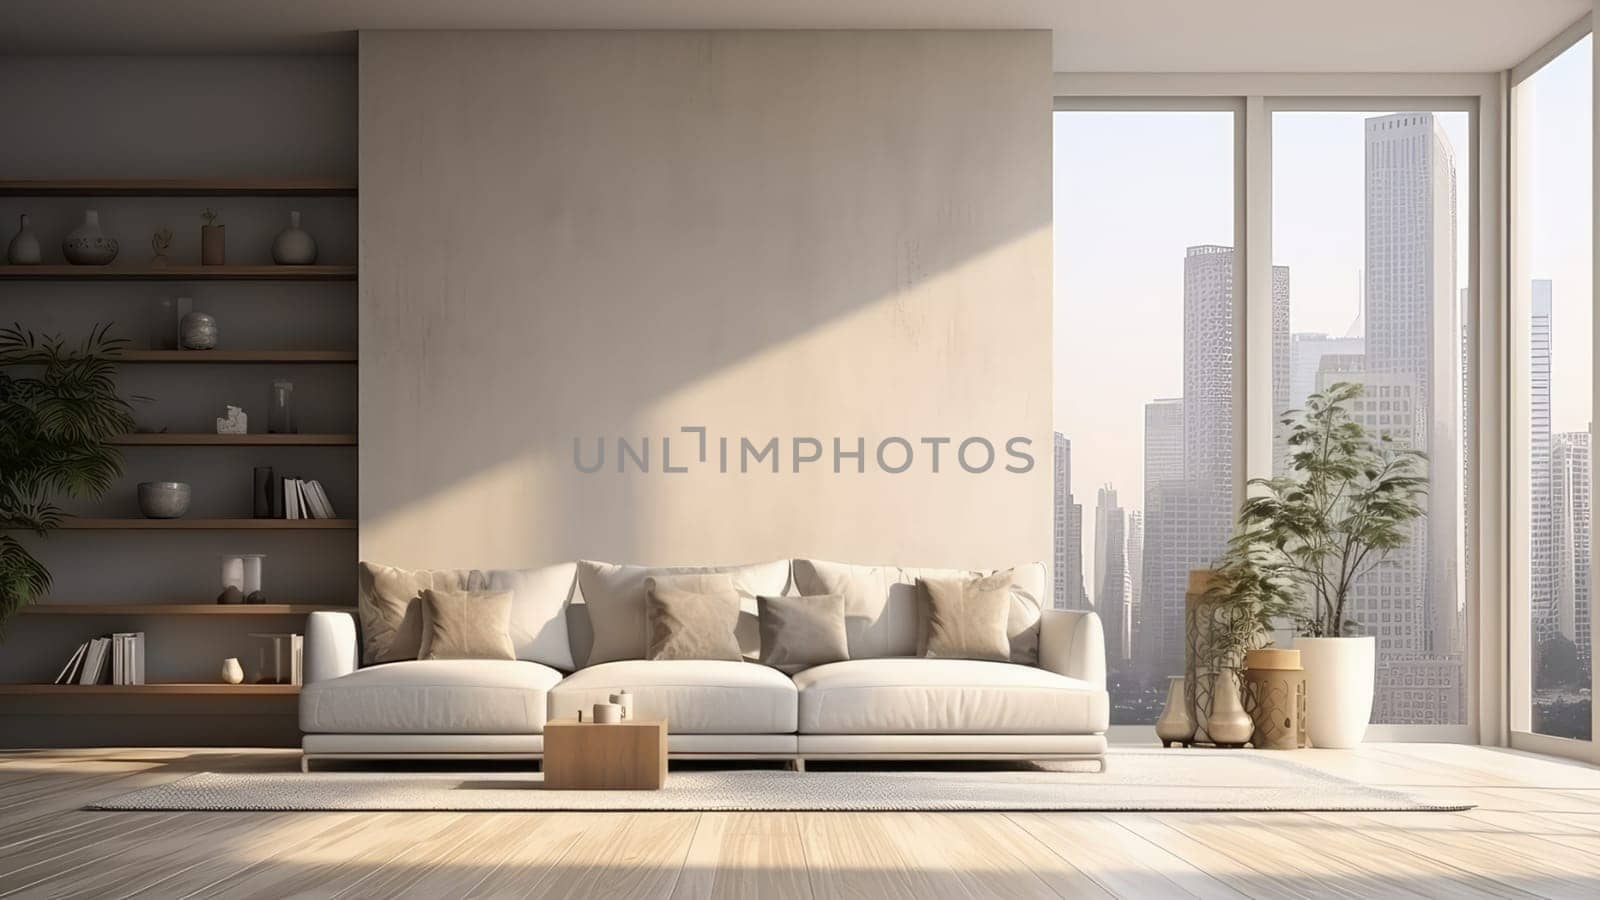 3D rendering of a living room with a couch and a city view from window. The couch is white and has pillows on it.